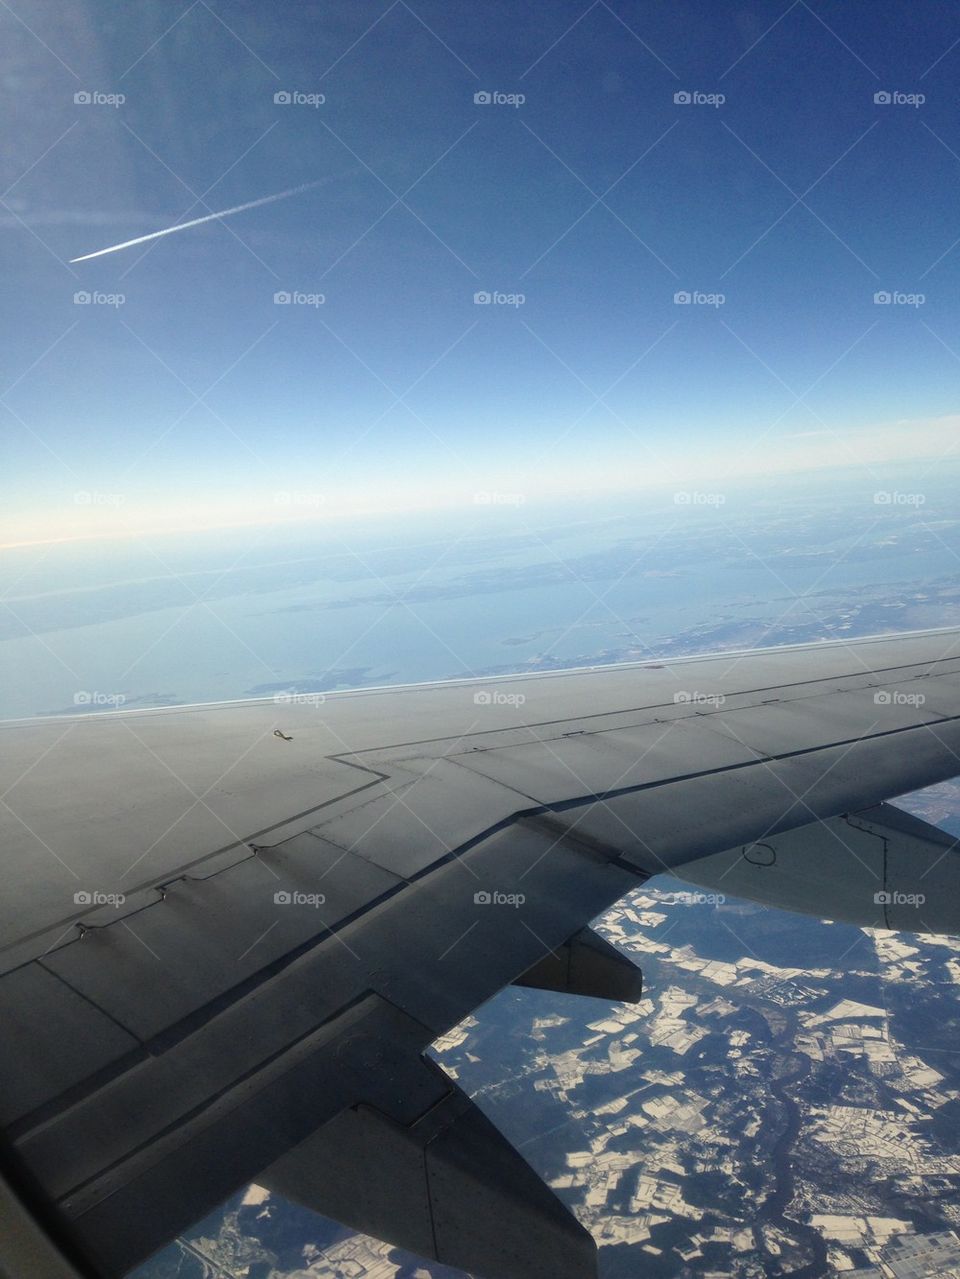 Over Europe